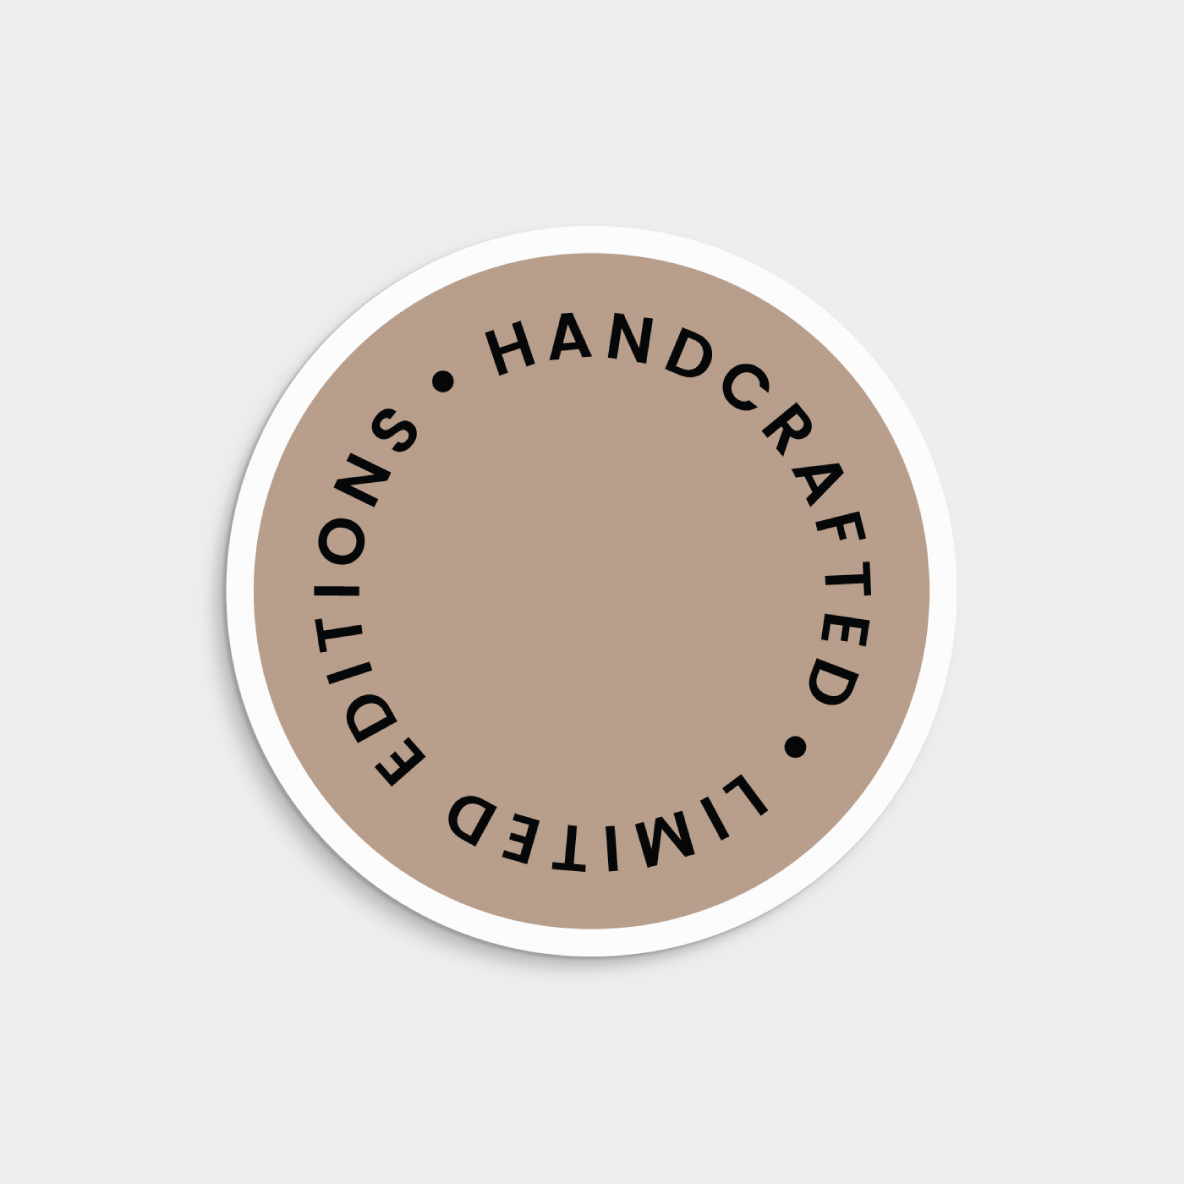 Speckled Circle Product Label with Logo,